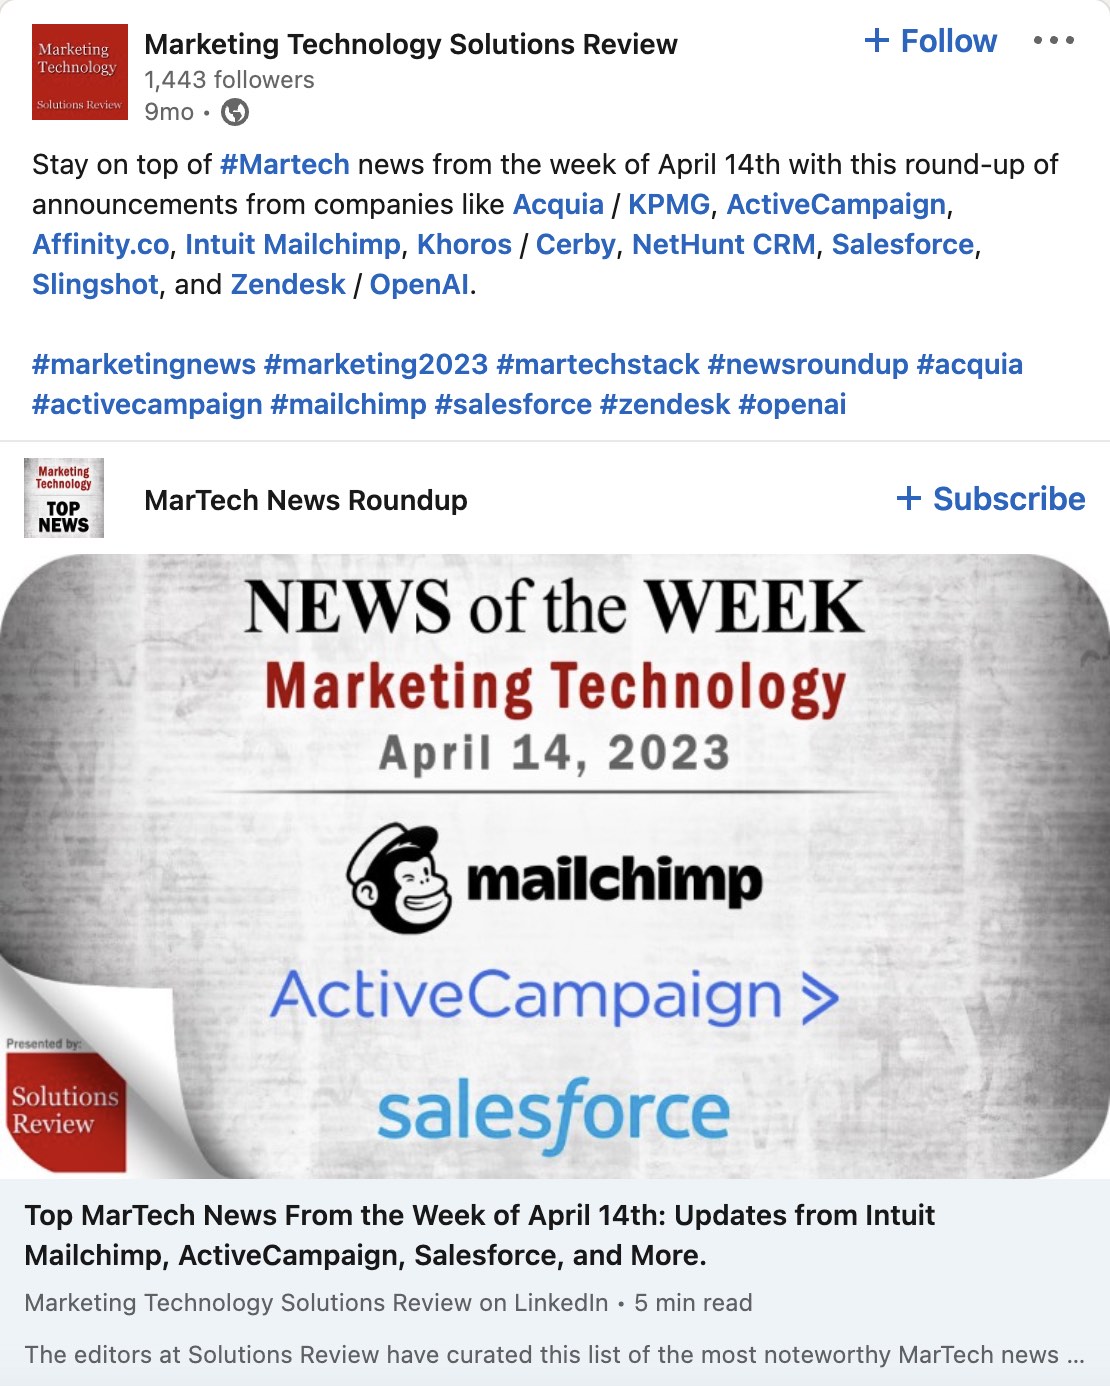 Marketing Technology Solutions Review's weekly newsletter